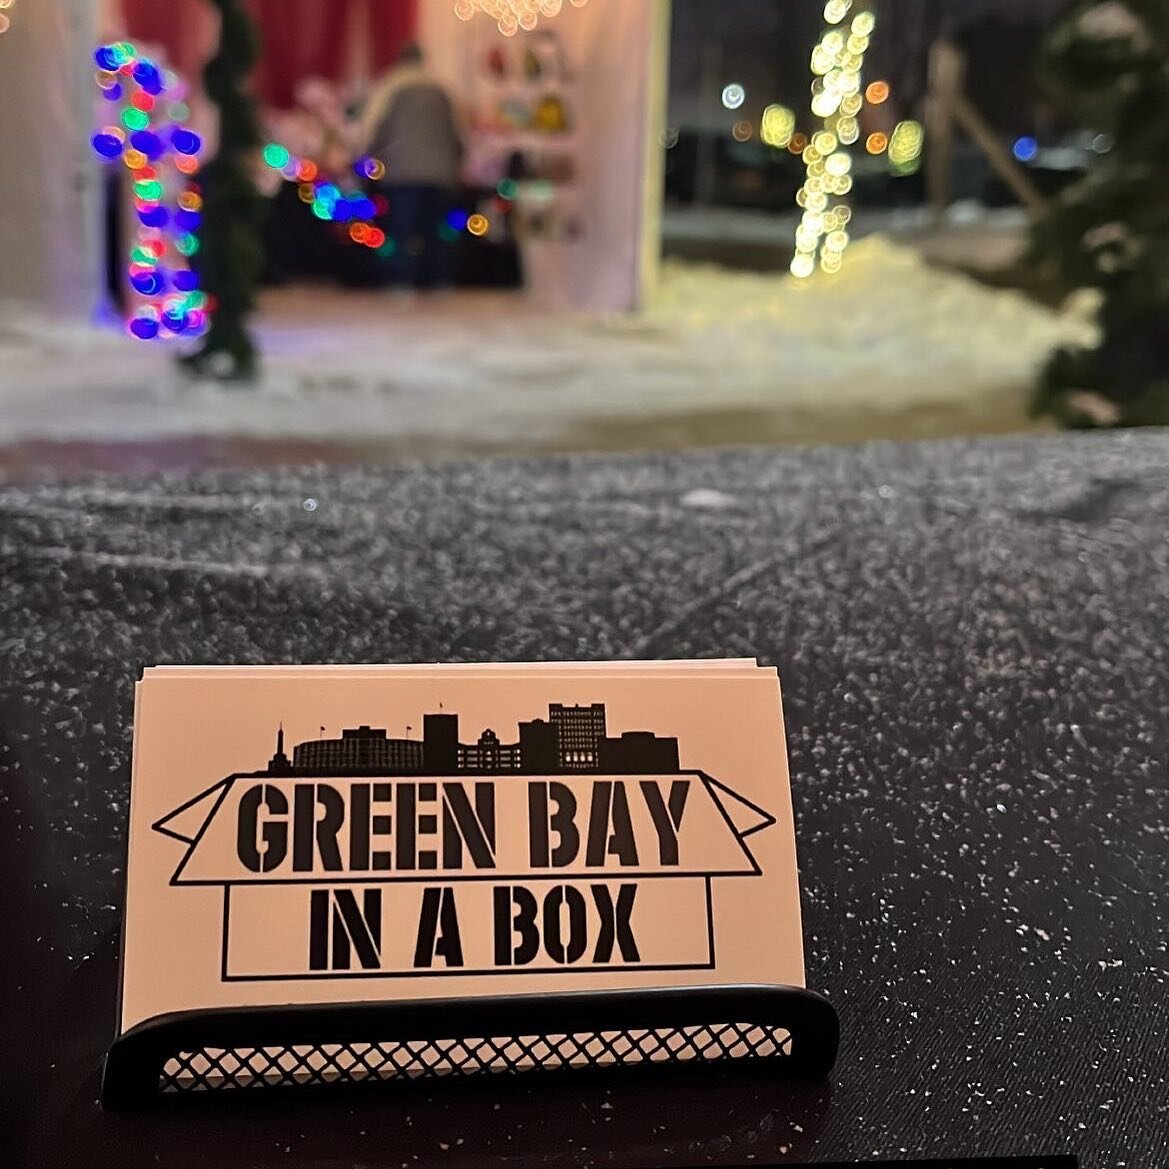 Had a tremendous two weeks at the @beonbroadway Christkindlmarket. Feeling encouraged going forward, and still have a dozen boxes still available for this Christmas. DM if you&rsquo;d like one! Online and corporate orders will begin after the first o